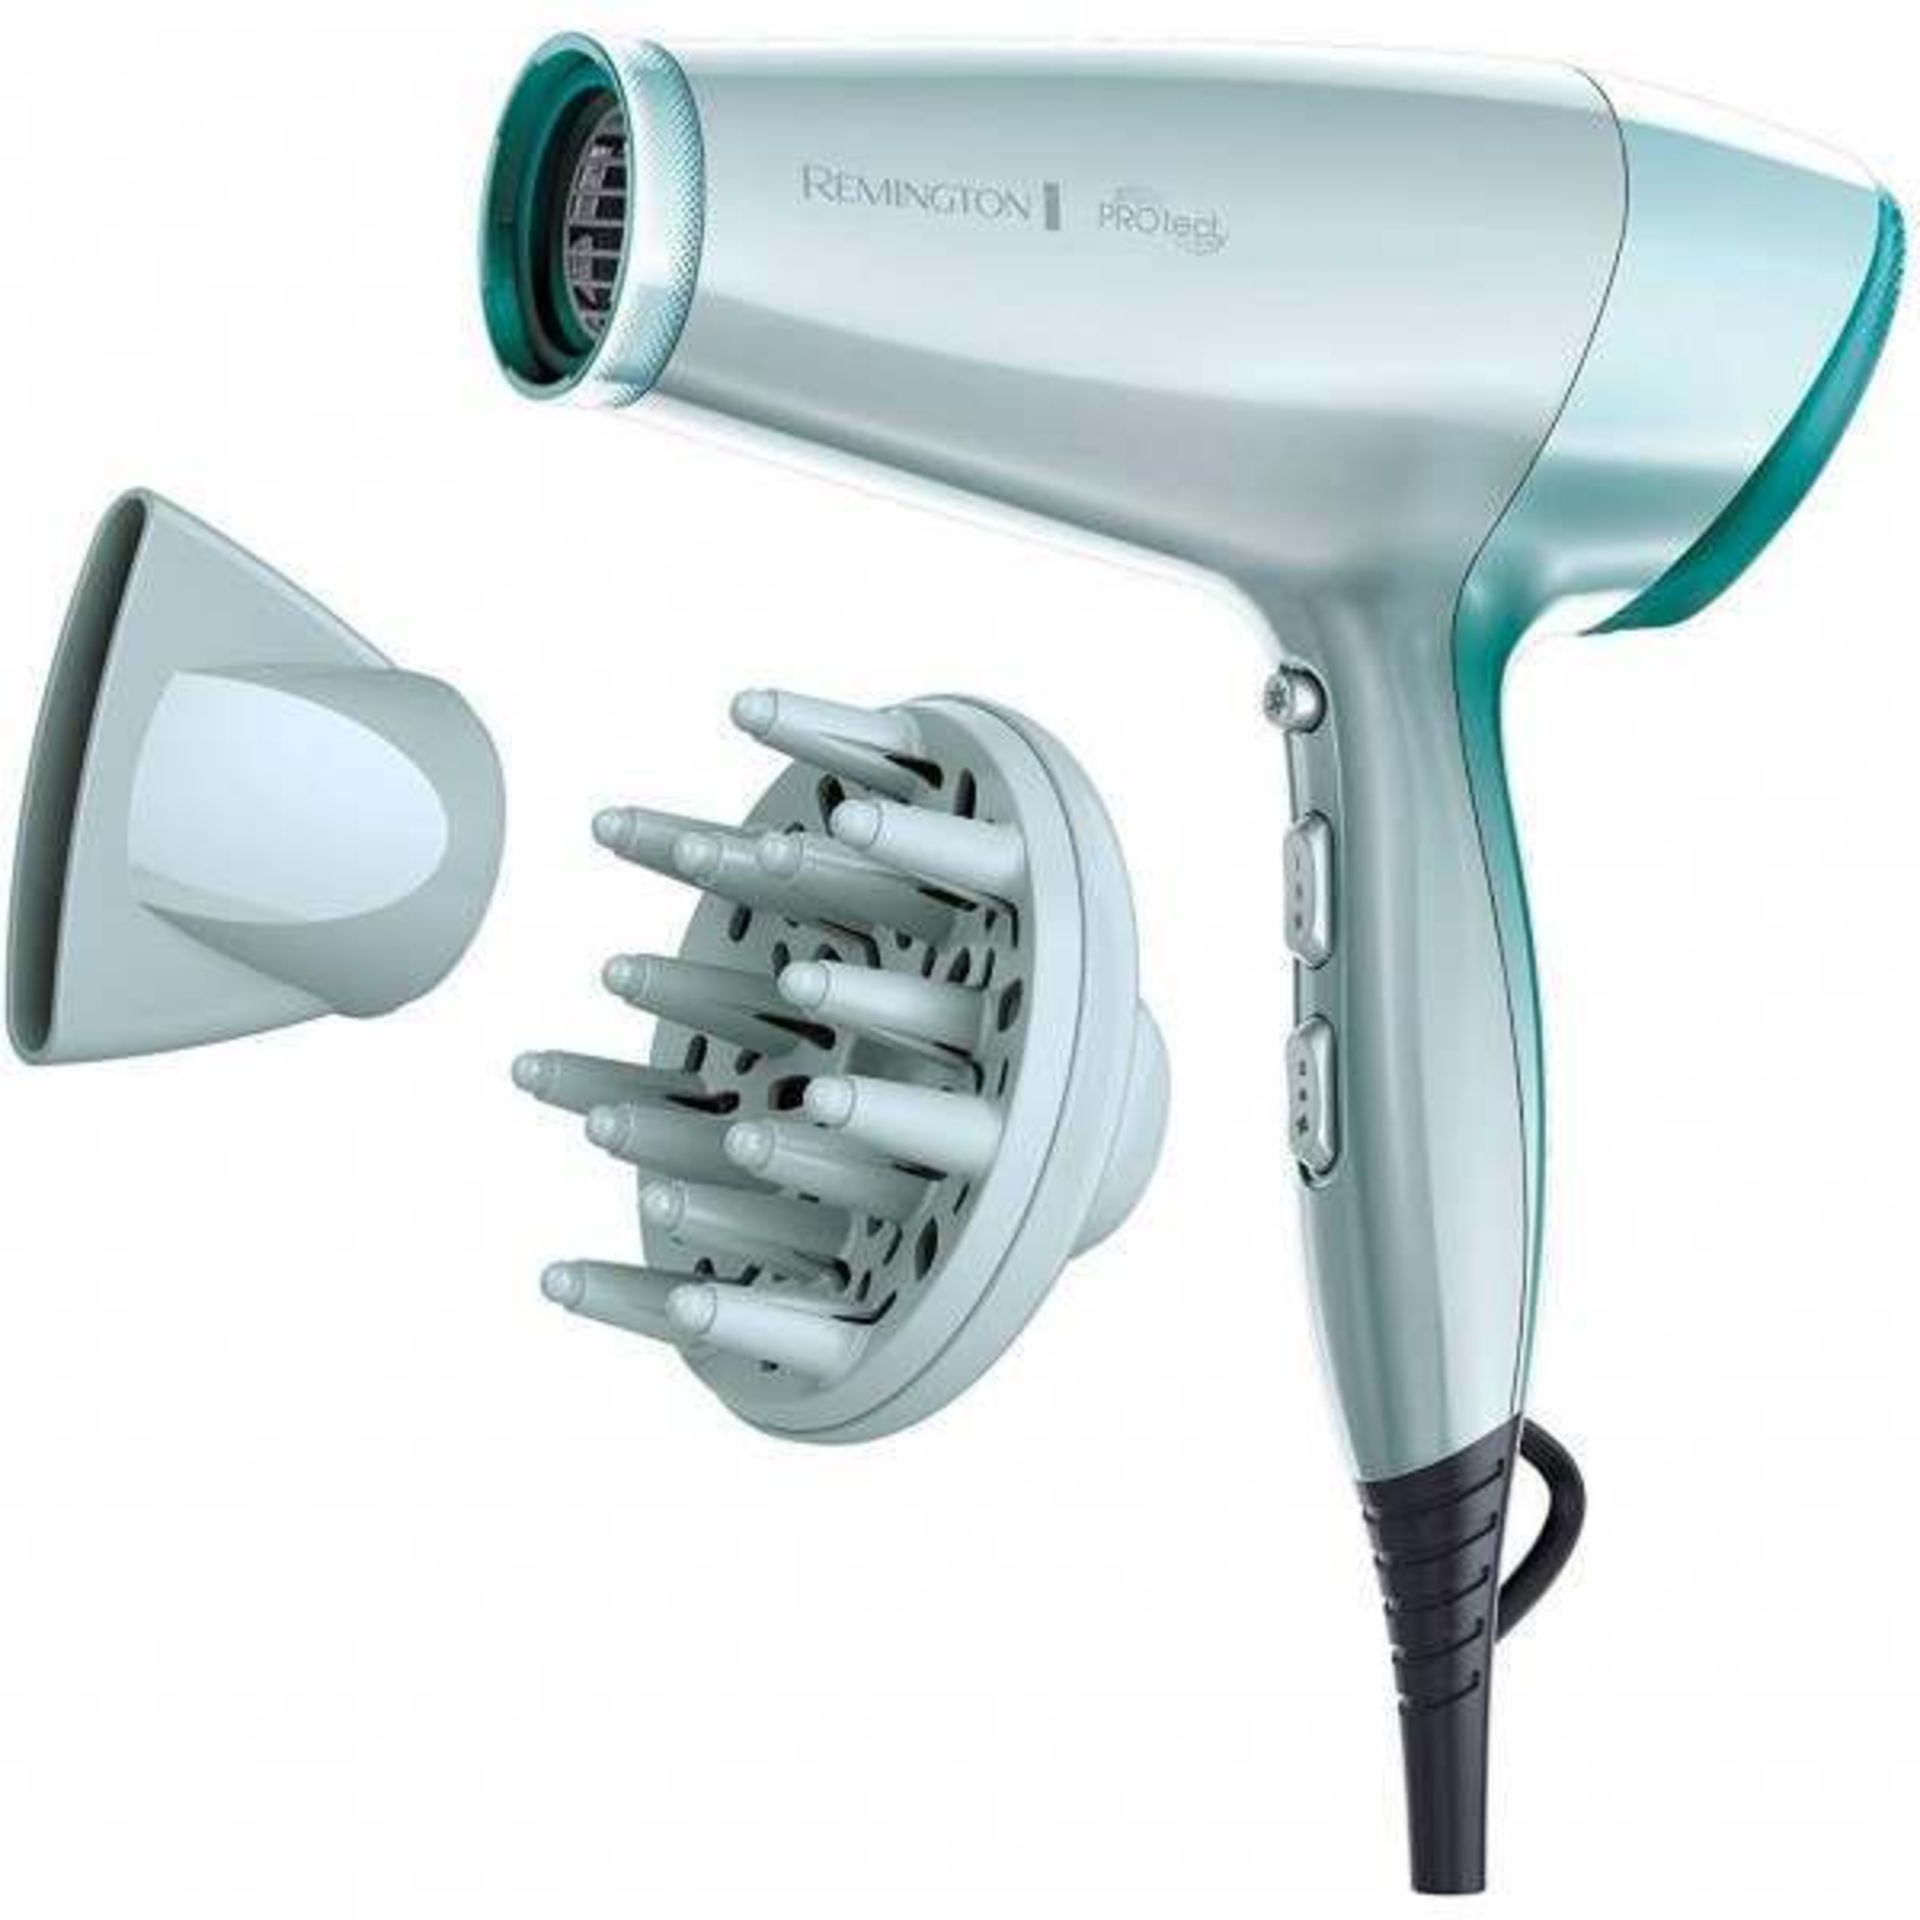 V Brand New Remington Protect Hair Dryer With Multiple Attachments - Aquatic Green - 2400w -